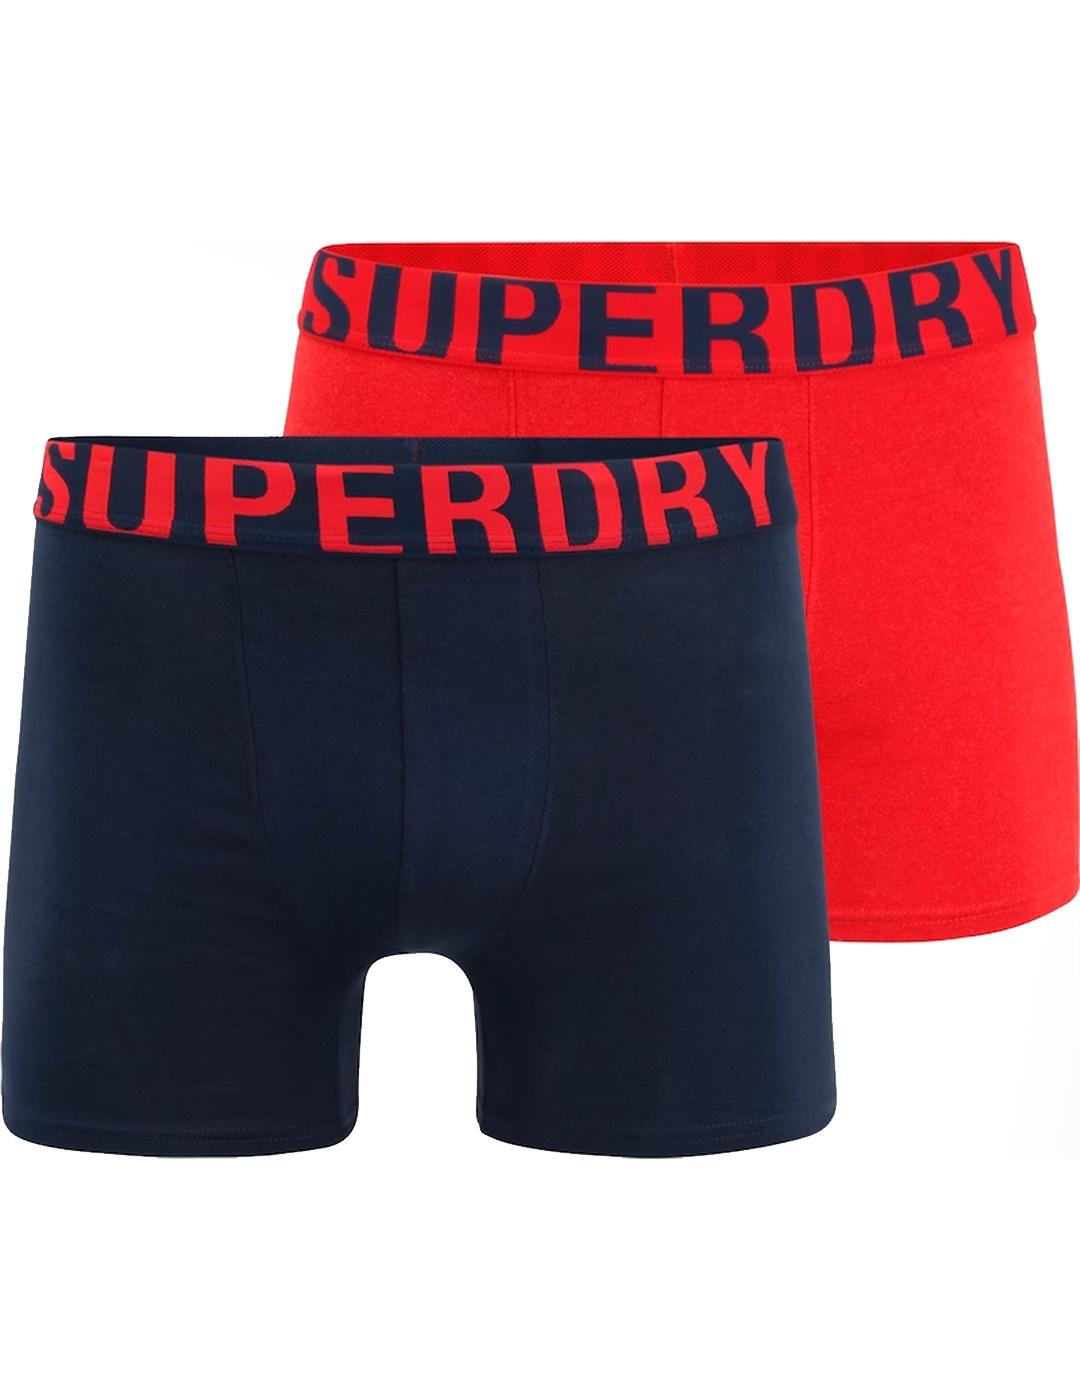 TRUNK PACK 2 SUPERDRY